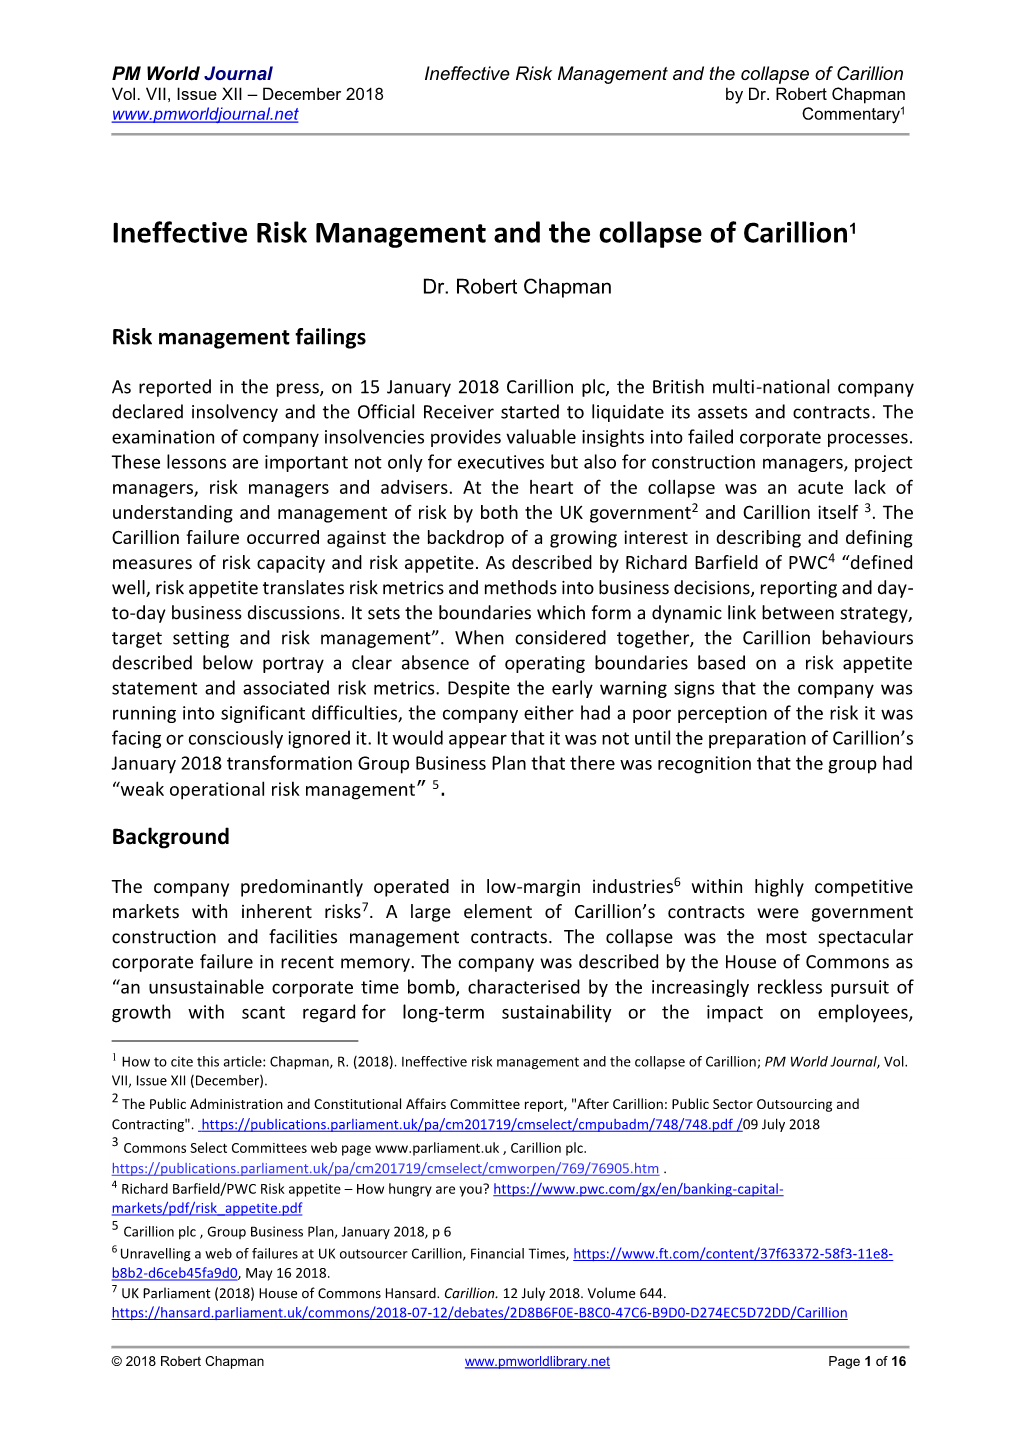 Ineffective Risk Management and the Collapse of Carillion Vol